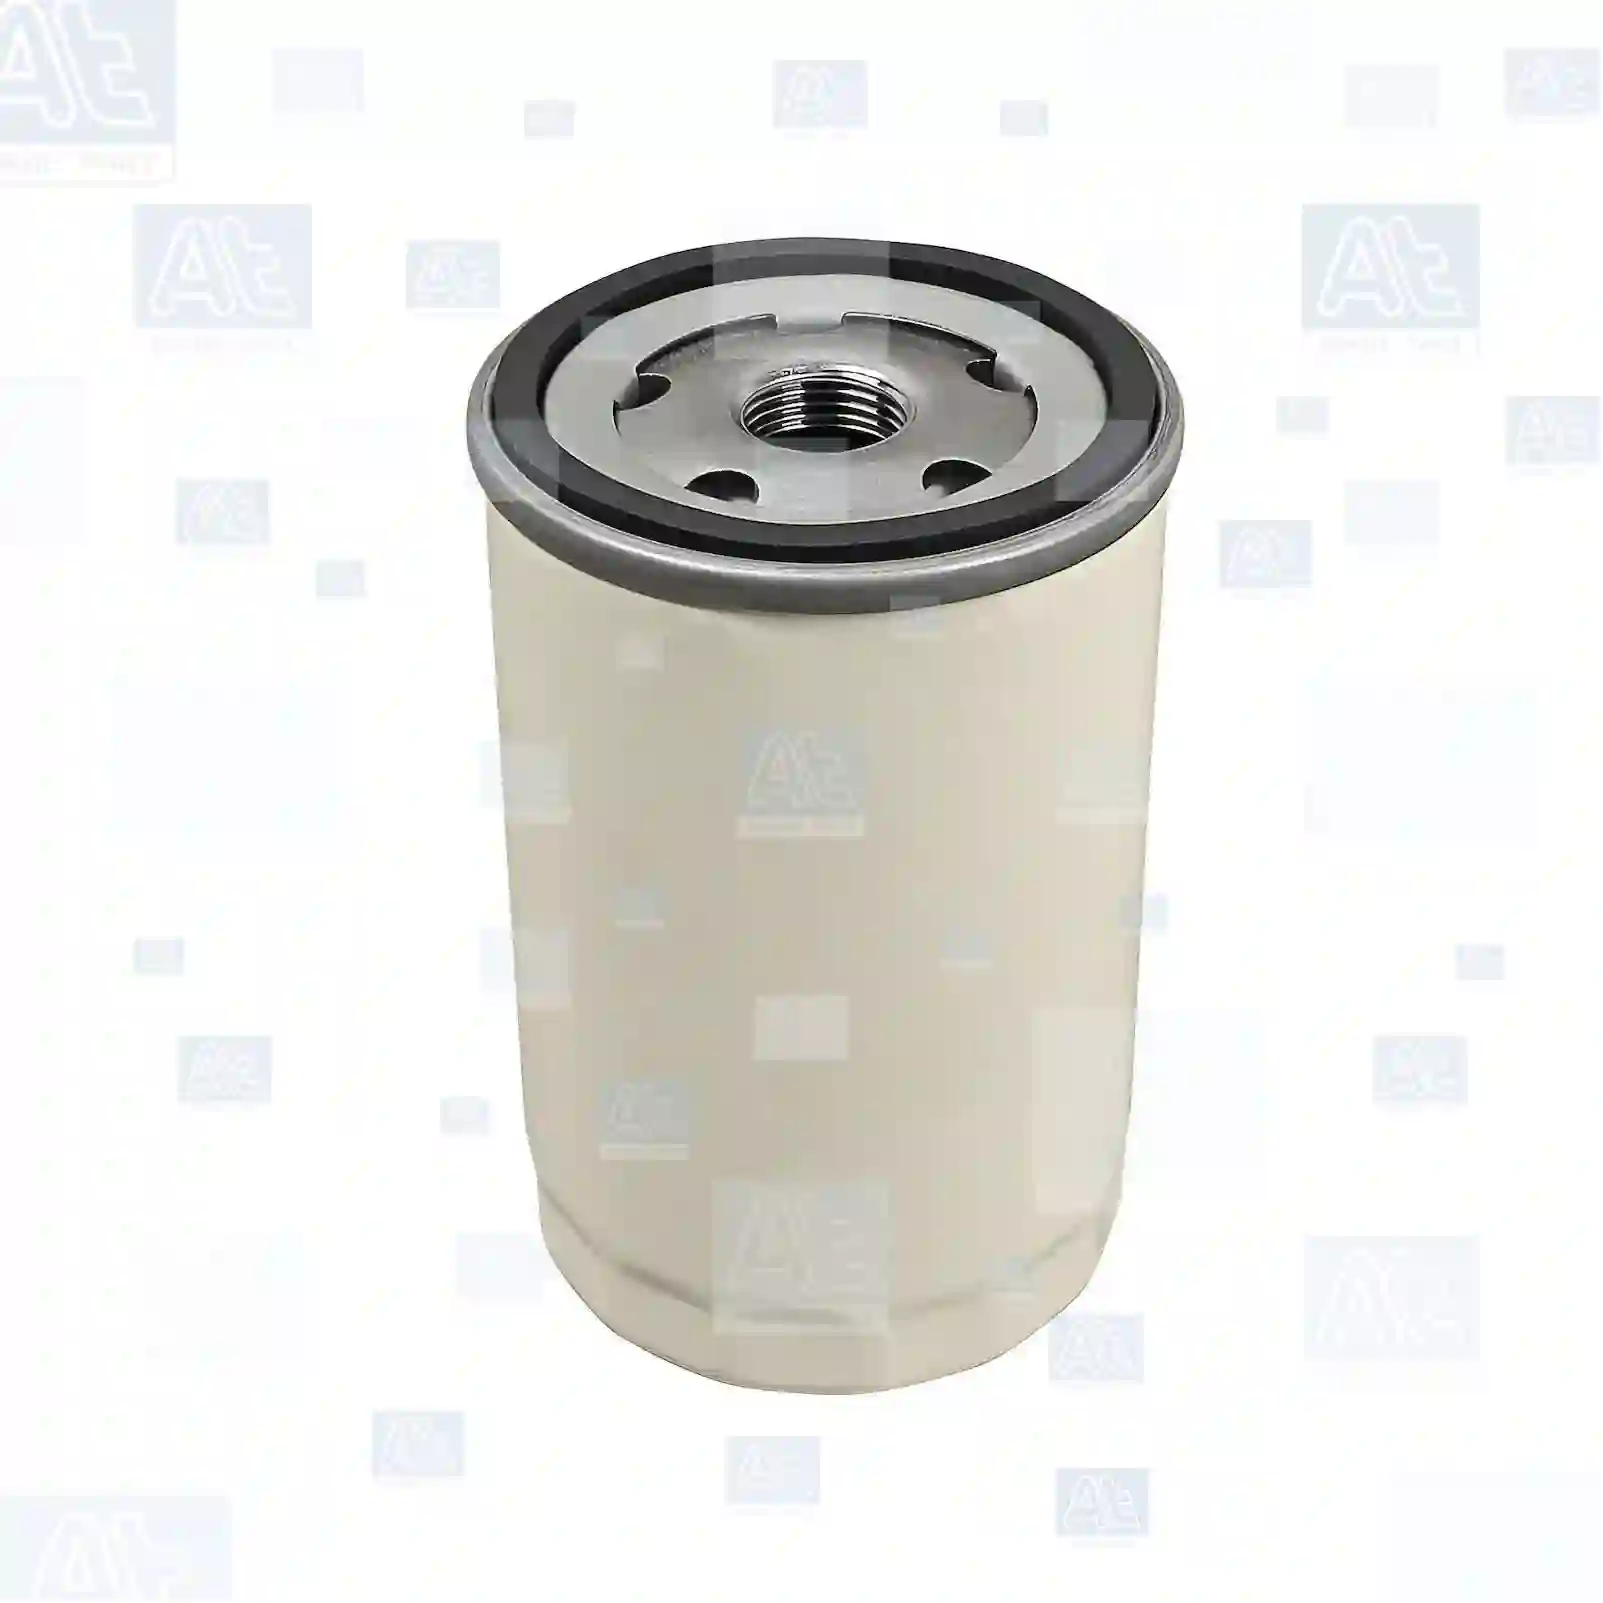 Oil filter, 77700696, 01FBO010, X152, 4781452AA, 4781452AB, 4781452BB, MD308302, MD353795, 4781452AA, 4781452BB, K04781452AA, 1026285, 1037678, 1043143, 1043147, 1047169, 1056613, 1066071, 1070523, 1071746, 1072434, 1097077, 1119421, 1663050, 1663051, 1667890, 3652059, 3652061, 3904728, 4454116, 5002718, 5002720, 5002721, 5002722, 5012000, 6057166, 6057167, 6066094, 6066095, 6636968, 6937010, 6937011, 978M-6714-A2A, 978M-6714-B1A, 978M-6714-B4A, YN2G-6714-B2A, 12490234, 25171947, 25322830, 2532411, 9975153, 4781452AA, 4781452BB, K04781452AA, TY22047, 4454116, BBU2994, ERR0681, ERR1168, ERR3340, ETC4953, ETC6519, ETC6599, HKJ2208, 1E0514302B, C60114302, C601143X2A, YF0914302, ZZM123802, ZZM123802A, MD353795, 2654412, 26110500, 35129000, 3577847, 75046821 ||  77700696 At Spare Part | Engine, Accelerator Pedal, Camshaft, Connecting Rod, Crankcase, Crankshaft, Cylinder Head, Engine Suspension Mountings, Exhaust Manifold, Exhaust Gas Recirculation, Filter Kits, Flywheel Housing, General Overhaul Kits, Engine, Intake Manifold, Oil Cleaner, Oil Cooler, Oil Filter, Oil Pump, Oil Sump, Piston & Liner, Sensor & Switch, Timing Case, Turbocharger, Cooling System, Belt Tensioner, Coolant Filter, Coolant Pipe, Corrosion Prevention Agent, Drive, Expansion Tank, Fan, Intercooler, Monitors & Gauges, Radiator, Thermostat, V-Belt / Timing belt, Water Pump, Fuel System, Electronical Injector Unit, Feed Pump, Fuel Filter, cpl., Fuel Gauge Sender,  Fuel Line, Fuel Pump, Fuel Tank, Injection Line Kit, Injection Pump, Exhaust System, Clutch & Pedal, Gearbox, Propeller Shaft, Axles, Brake System, Hubs & Wheels, Suspension, Leaf Spring, Universal Parts / Accessories, Steering, Electrical System, Cabin Oil filter, 77700696, 01FBO010, X152, 4781452AA, 4781452AB, 4781452BB, MD308302, MD353795, 4781452AA, 4781452BB, K04781452AA, 1026285, 1037678, 1043143, 1043147, 1047169, 1056613, 1066071, 1070523, 1071746, 1072434, 1097077, 1119421, 1663050, 1663051, 1667890, 3652059, 3652061, 3904728, 4454116, 5002718, 5002720, 5002721, 5002722, 5012000, 6057166, 6057167, 6066094, 6066095, 6636968, 6937010, 6937011, 978M-6714-A2A, 978M-6714-B1A, 978M-6714-B4A, YN2G-6714-B2A, 12490234, 25171947, 25322830, 2532411, 9975153, 4781452AA, 4781452BB, K04781452AA, TY22047, 4454116, BBU2994, ERR0681, ERR1168, ERR3340, ETC4953, ETC6519, ETC6599, HKJ2208, 1E0514302B, C60114302, C601143X2A, YF0914302, ZZM123802, ZZM123802A, MD353795, 2654412, 26110500, 35129000, 3577847, 75046821 ||  77700696 At Spare Part | Engine, Accelerator Pedal, Camshaft, Connecting Rod, Crankcase, Crankshaft, Cylinder Head, Engine Suspension Mountings, Exhaust Manifold, Exhaust Gas Recirculation, Filter Kits, Flywheel Housing, General Overhaul Kits, Engine, Intake Manifold, Oil Cleaner, Oil Cooler, Oil Filter, Oil Pump, Oil Sump, Piston & Liner, Sensor & Switch, Timing Case, Turbocharger, Cooling System, Belt Tensioner, Coolant Filter, Coolant Pipe, Corrosion Prevention Agent, Drive, Expansion Tank, Fan, Intercooler, Monitors & Gauges, Radiator, Thermostat, V-Belt / Timing belt, Water Pump, Fuel System, Electronical Injector Unit, Feed Pump, Fuel Filter, cpl., Fuel Gauge Sender,  Fuel Line, Fuel Pump, Fuel Tank, Injection Line Kit, Injection Pump, Exhaust System, Clutch & Pedal, Gearbox, Propeller Shaft, Axles, Brake System, Hubs & Wheels, Suspension, Leaf Spring, Universal Parts / Accessories, Steering, Electrical System, Cabin